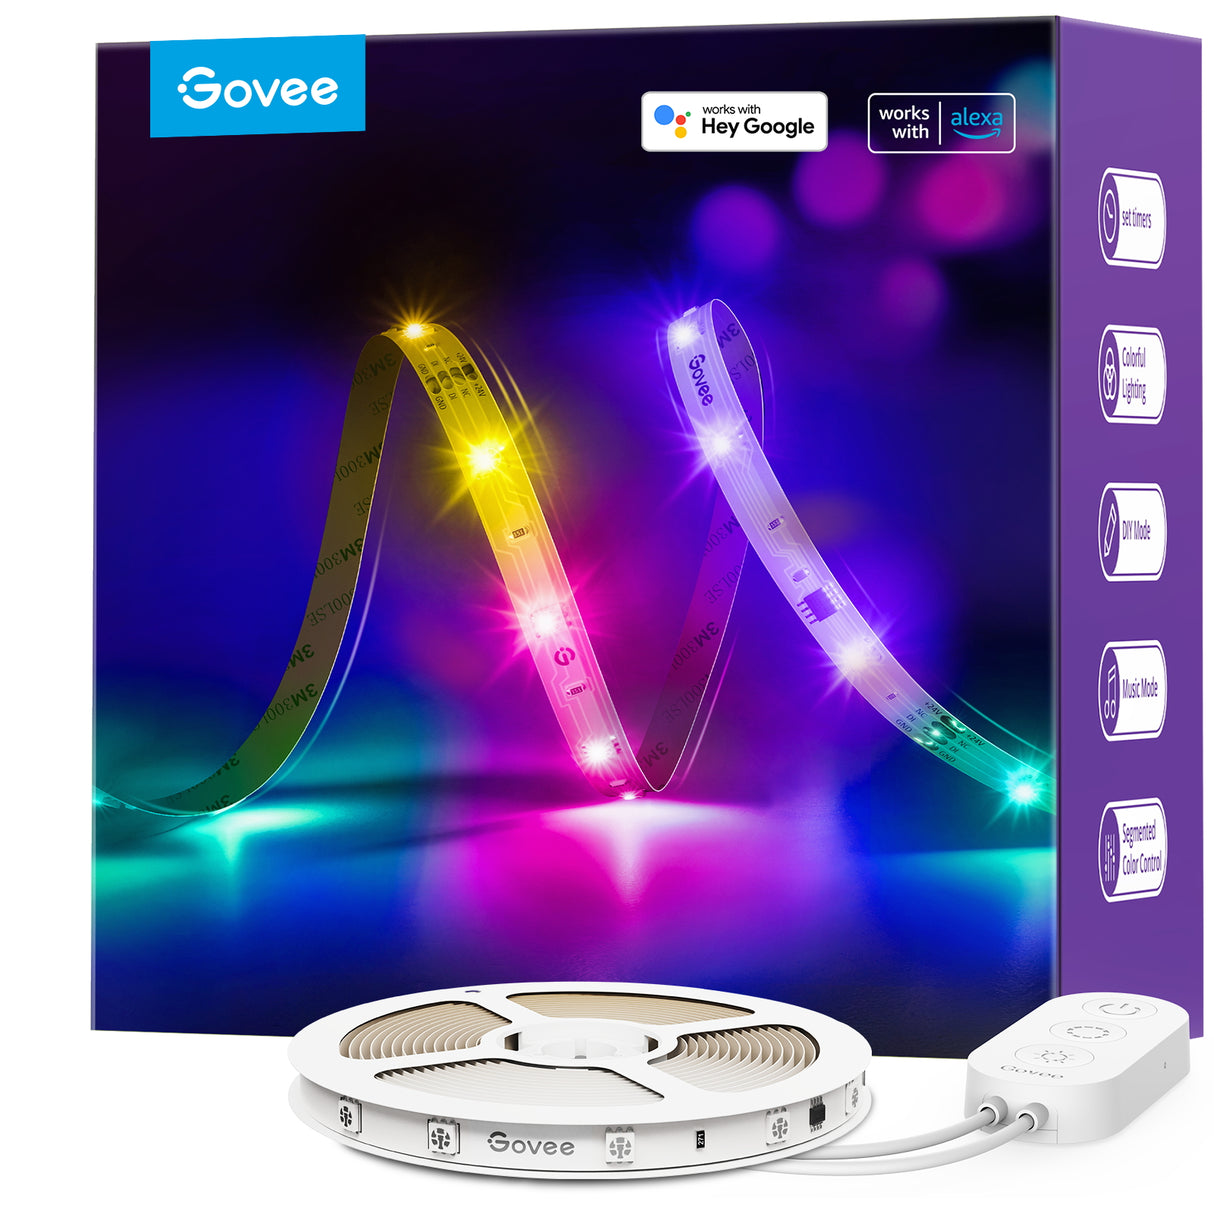 Govee Alexa LED Lights 10m, Smart WiFi App Control RGB LED Strip Lights,  Work with Alexa and Google Assistant, Colour Changing, Music Sync for